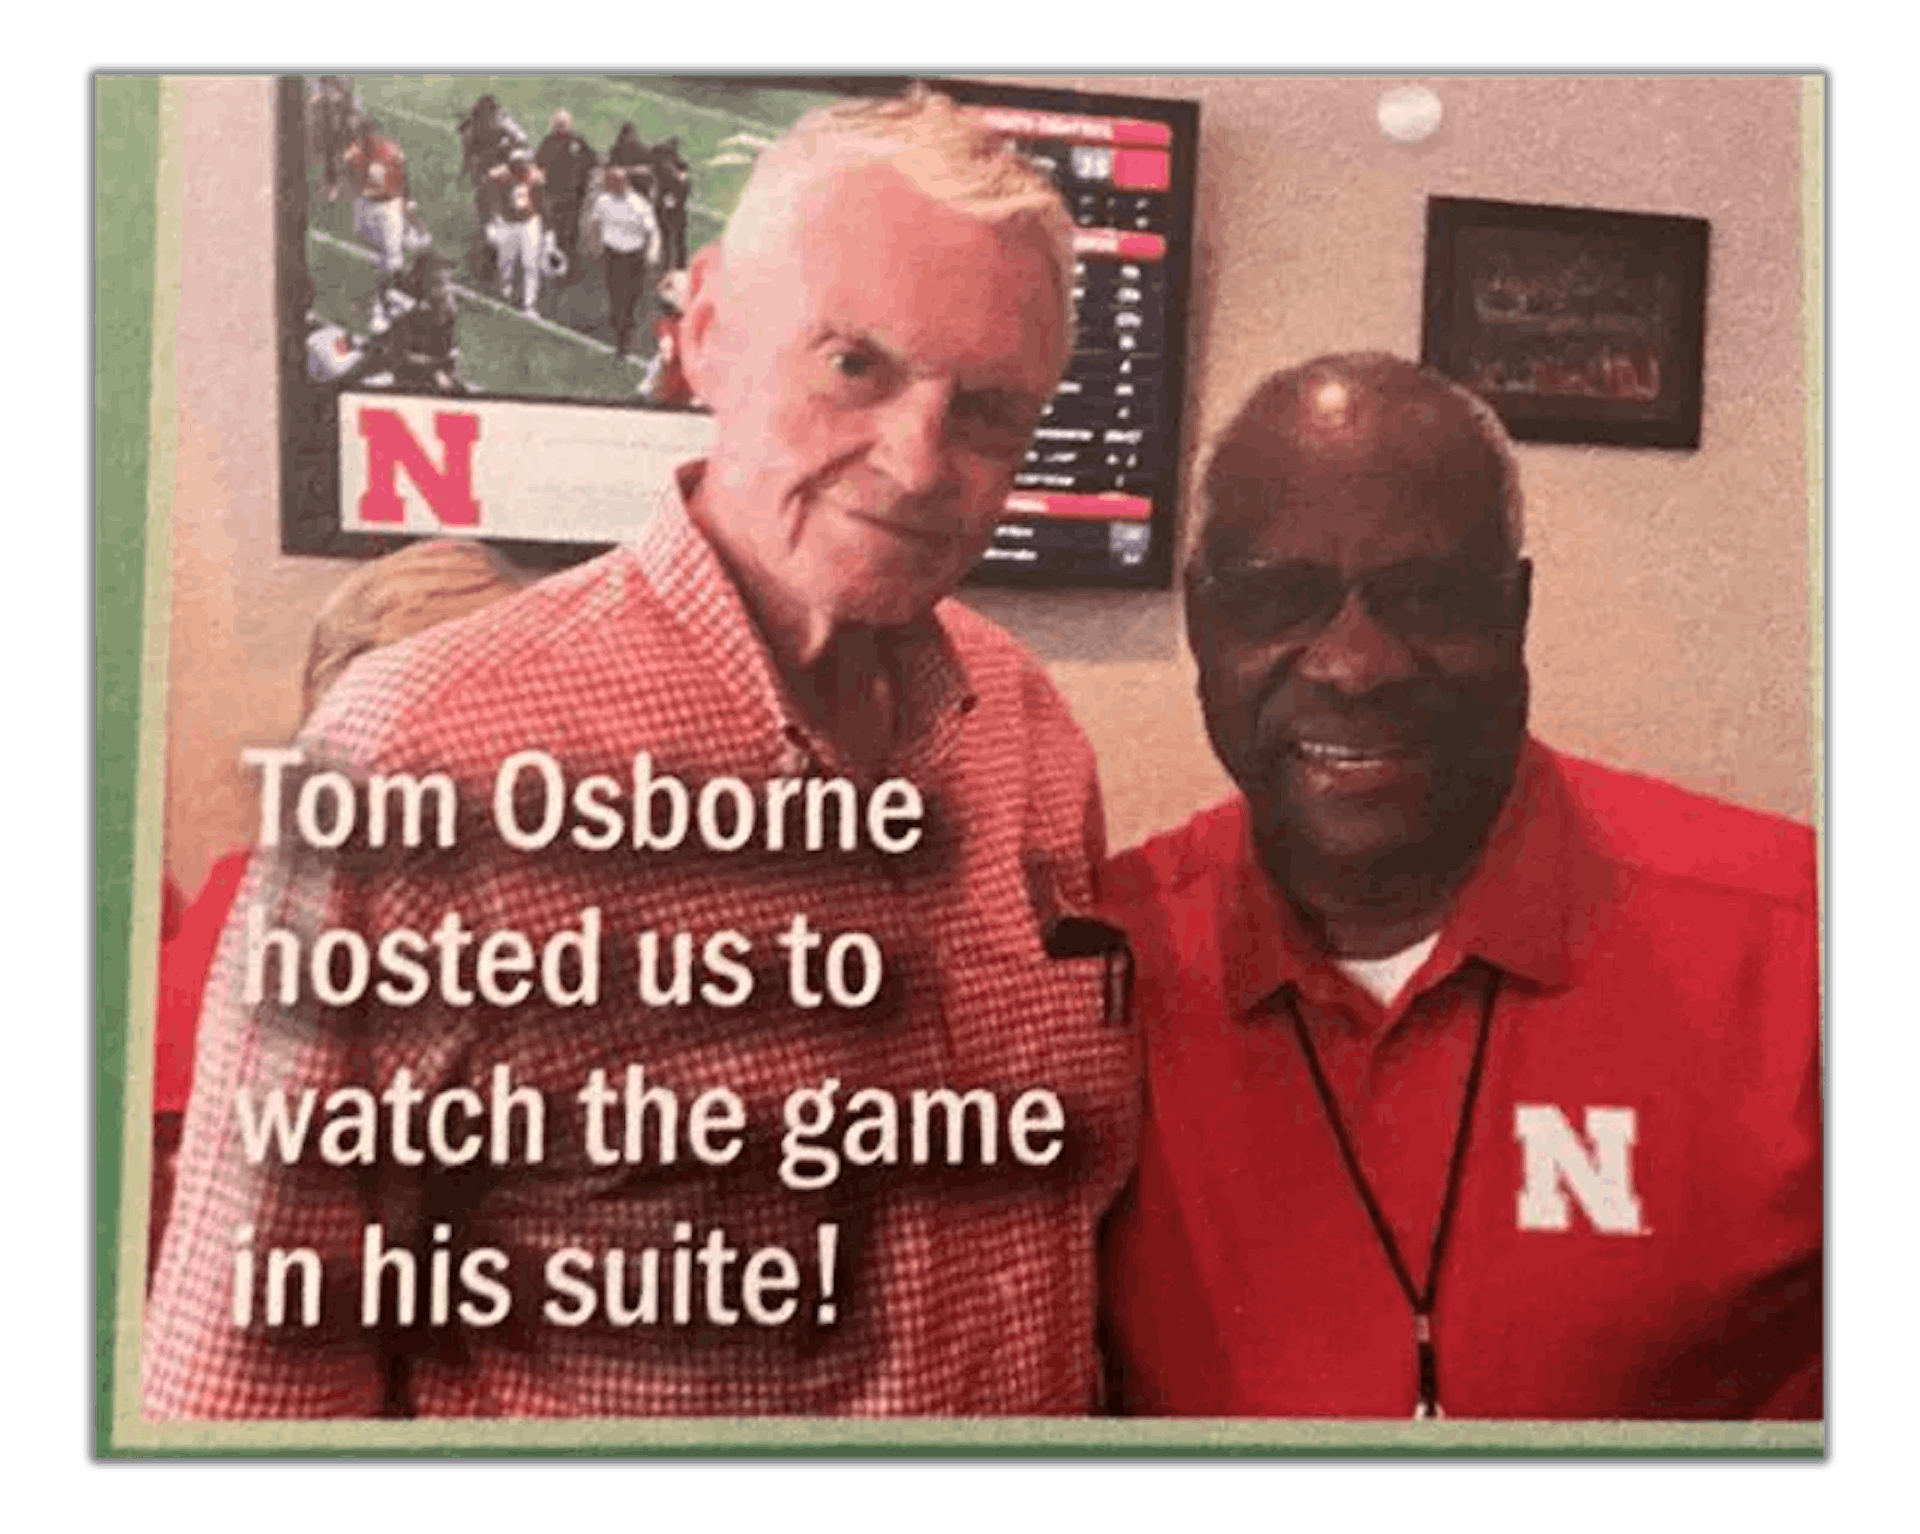 On Labor Day weekend, 2019, the group sat in former football coach and ex-congressman Tom Osborne’s suite. Osborne told ProPublica he and the justice became friends years ago, when he was in office. Credit: Obtained by ProPublica